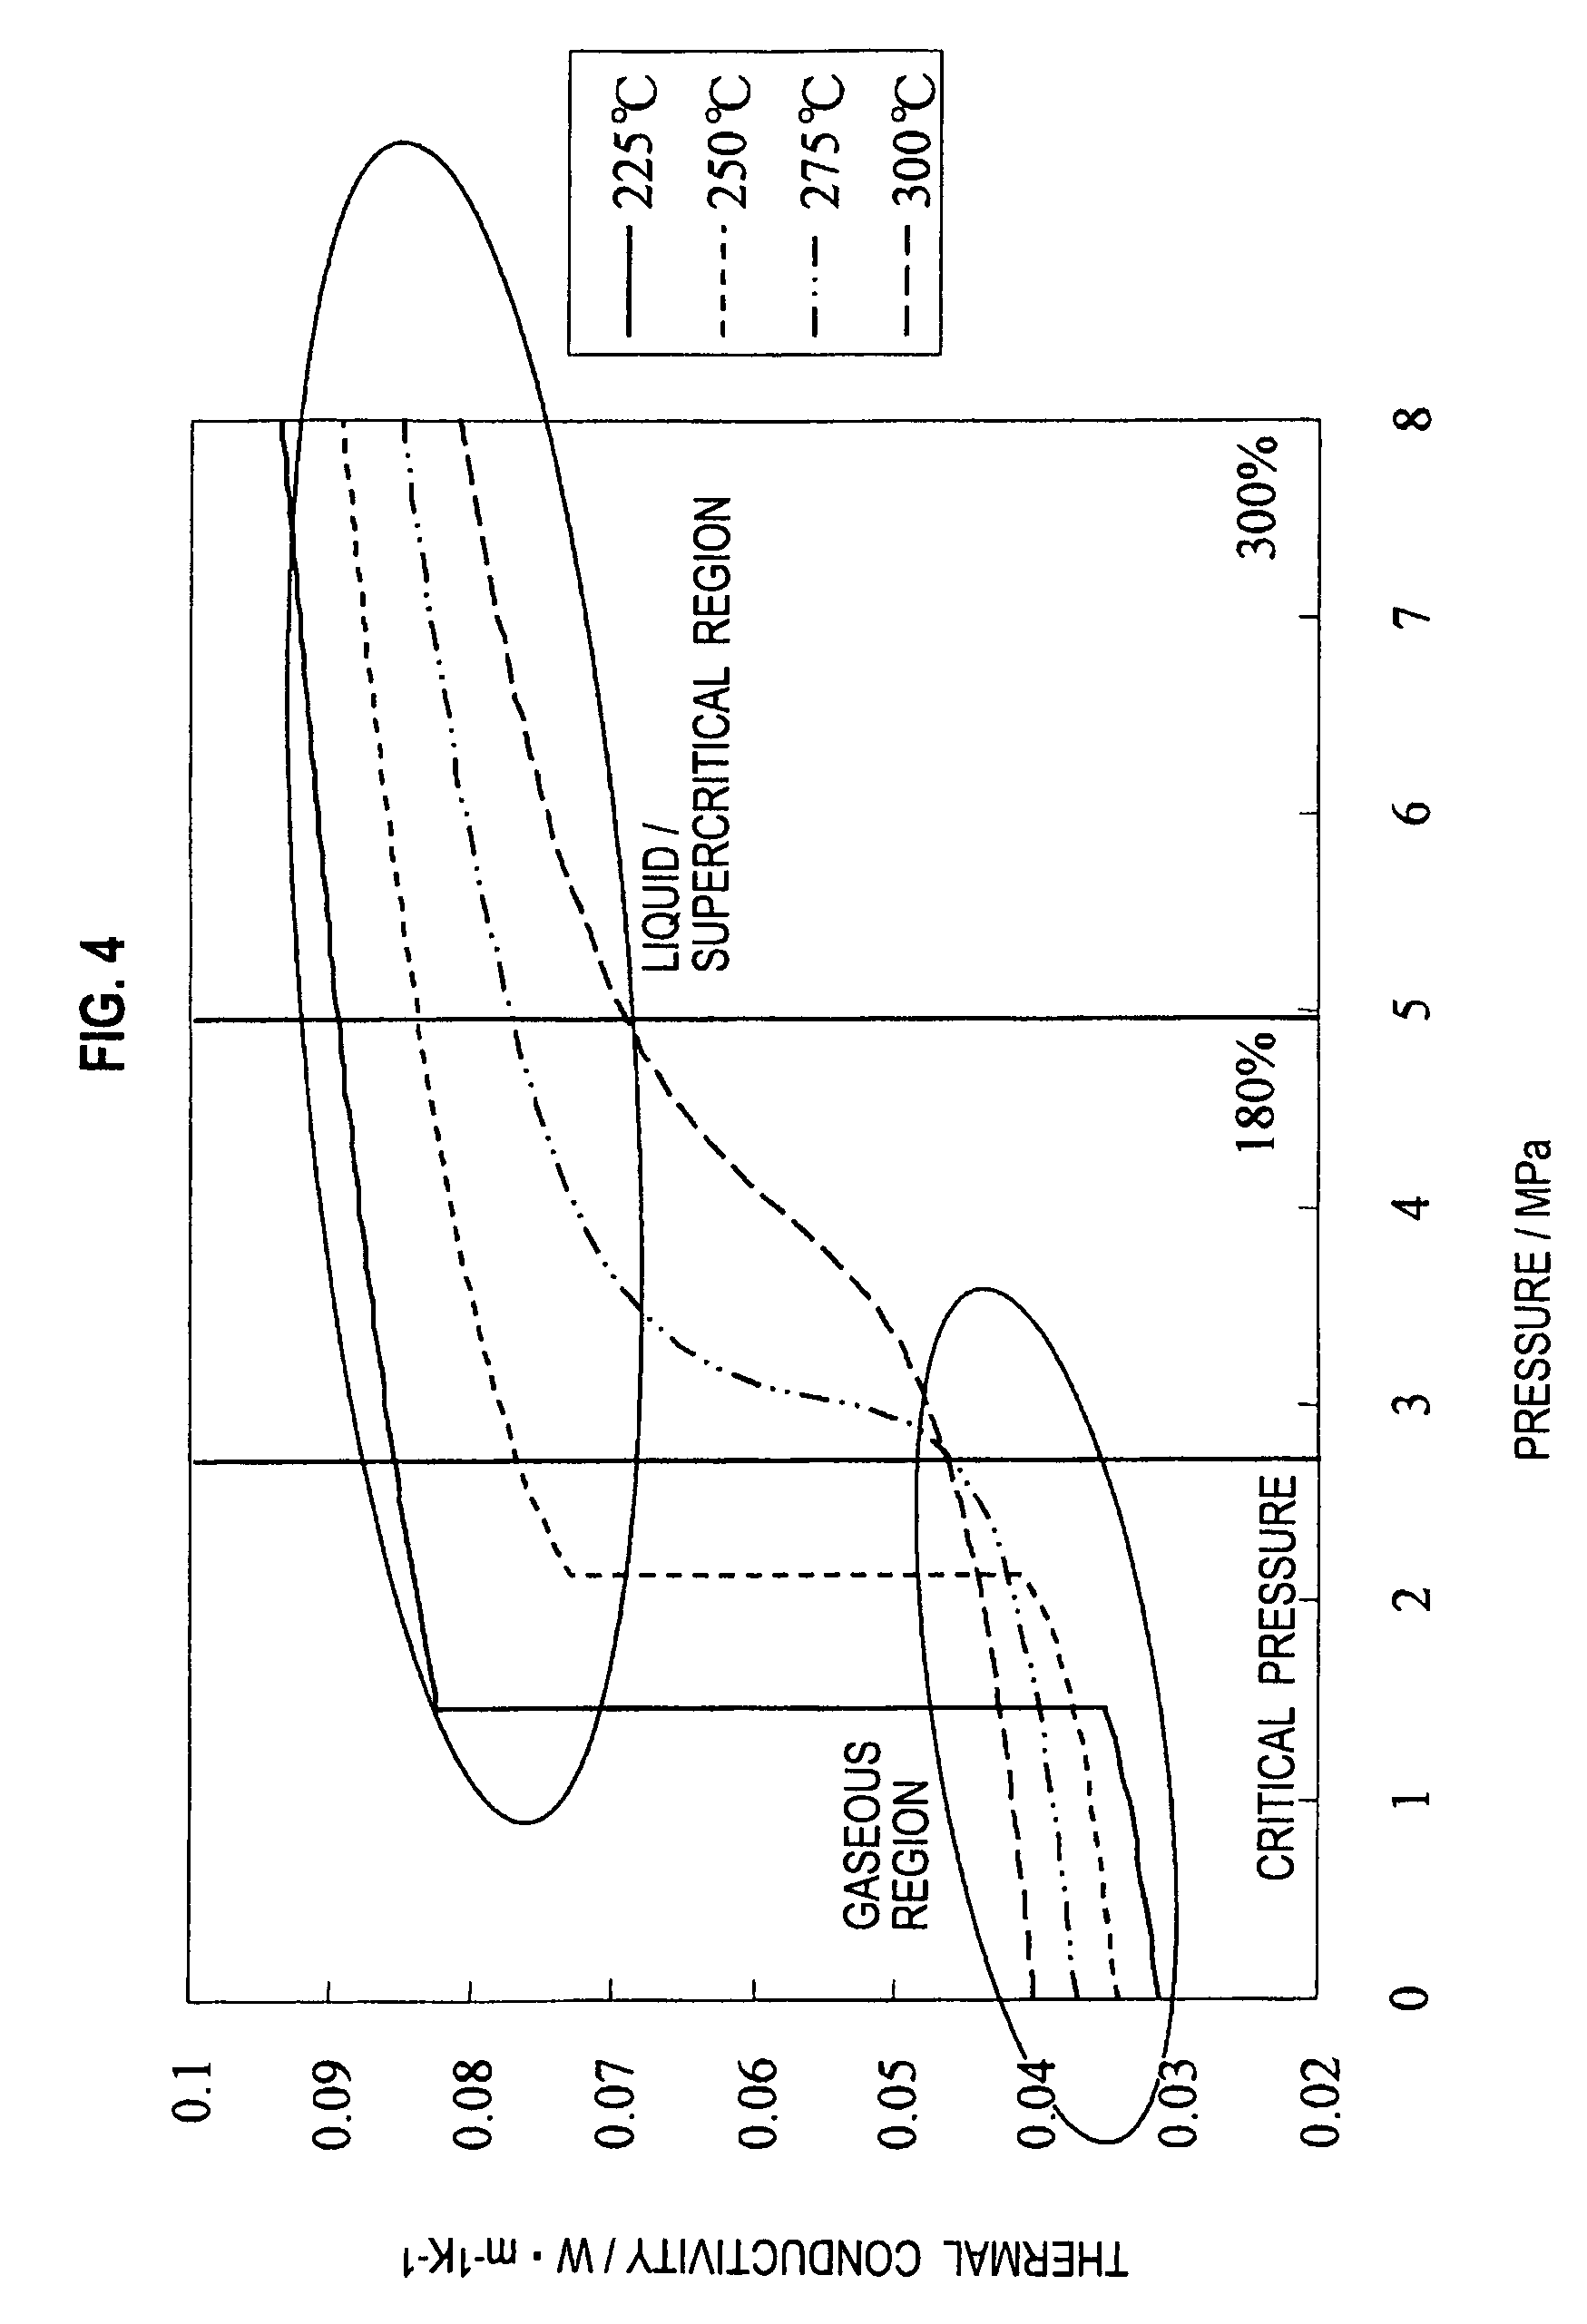 Fluid reforming apparatus for maintaining thermal conductivity of a fluid in a flow channel